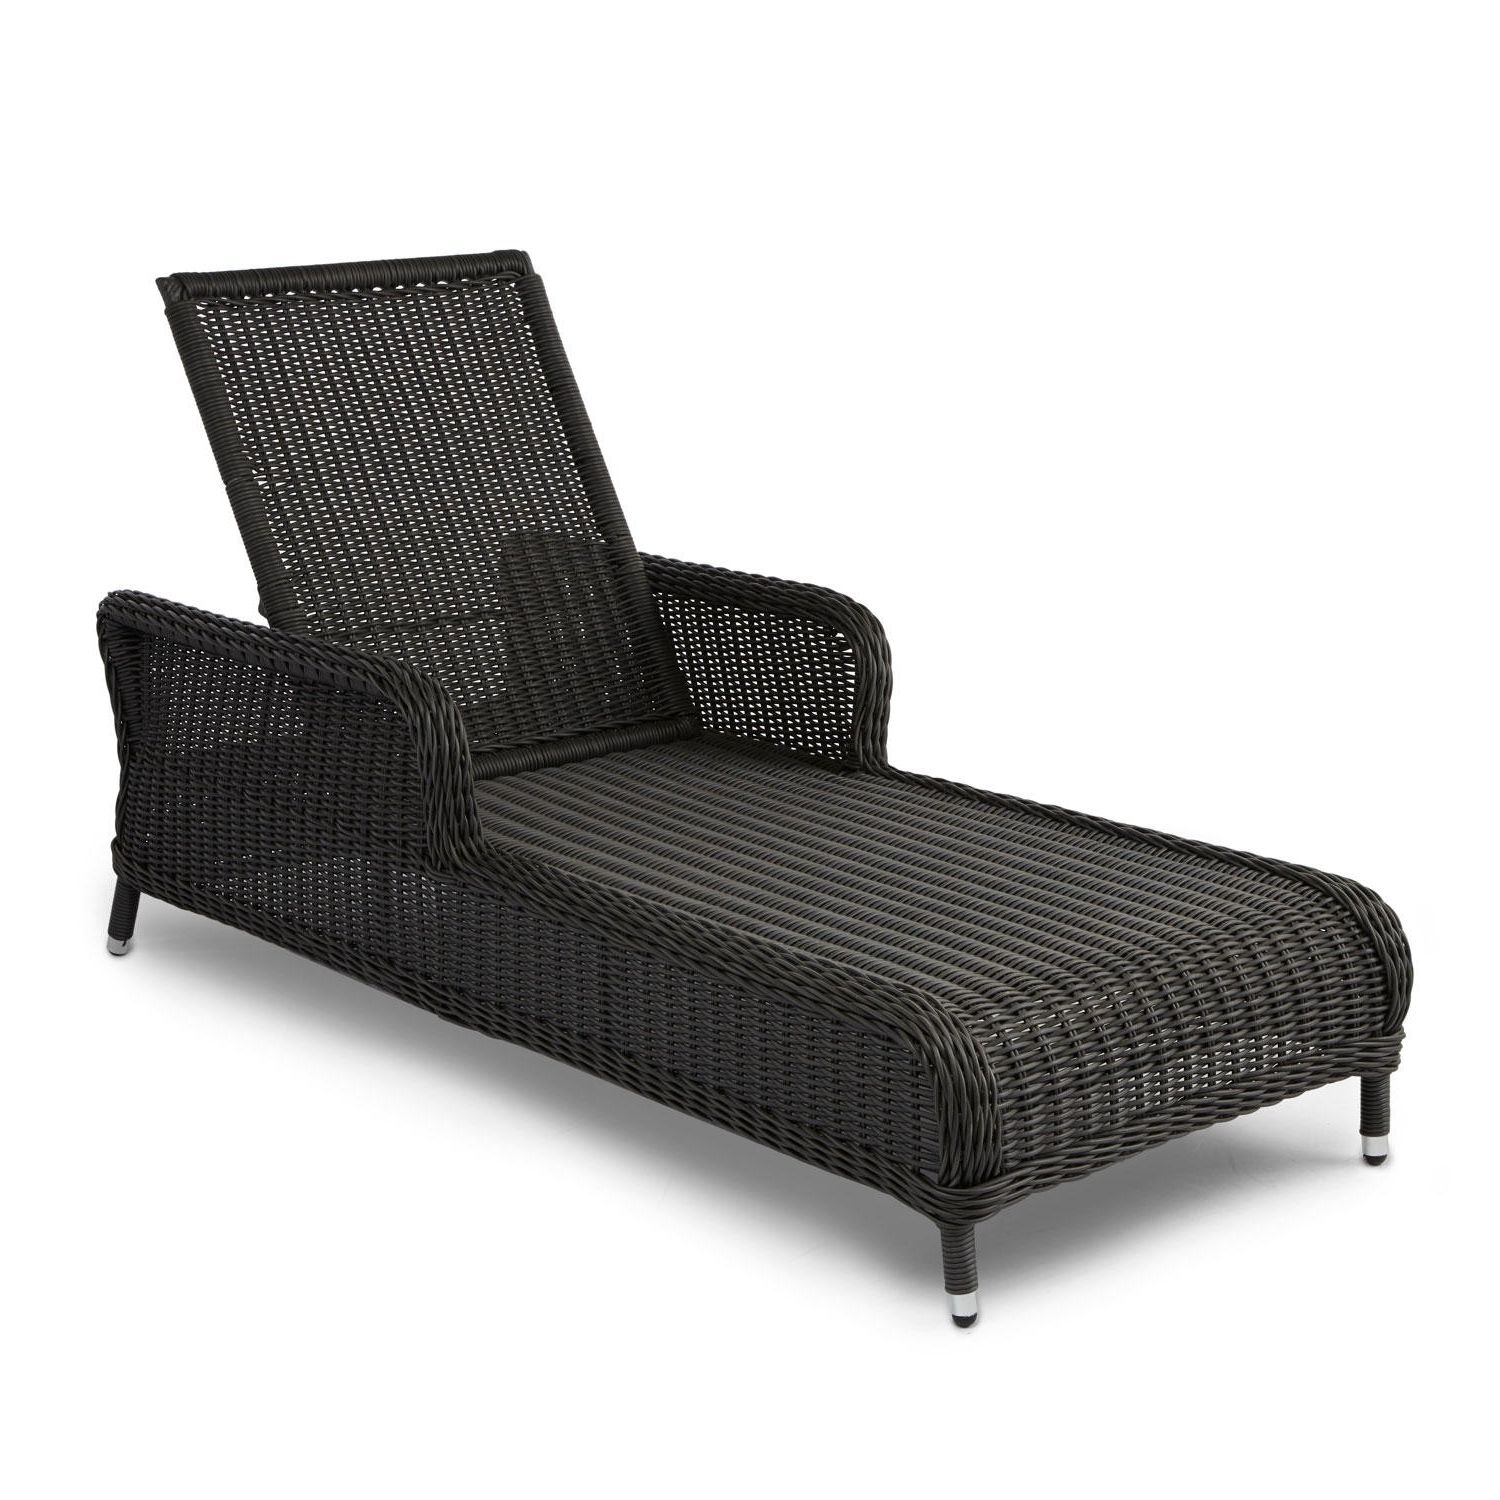 Outdoor : Chaise Lounge Chairs Lowes Outdoor Patio Chaise Lounges Pertaining To Favorite Black Chaise Lounge Outdoor Chairs (View 4 of 15)